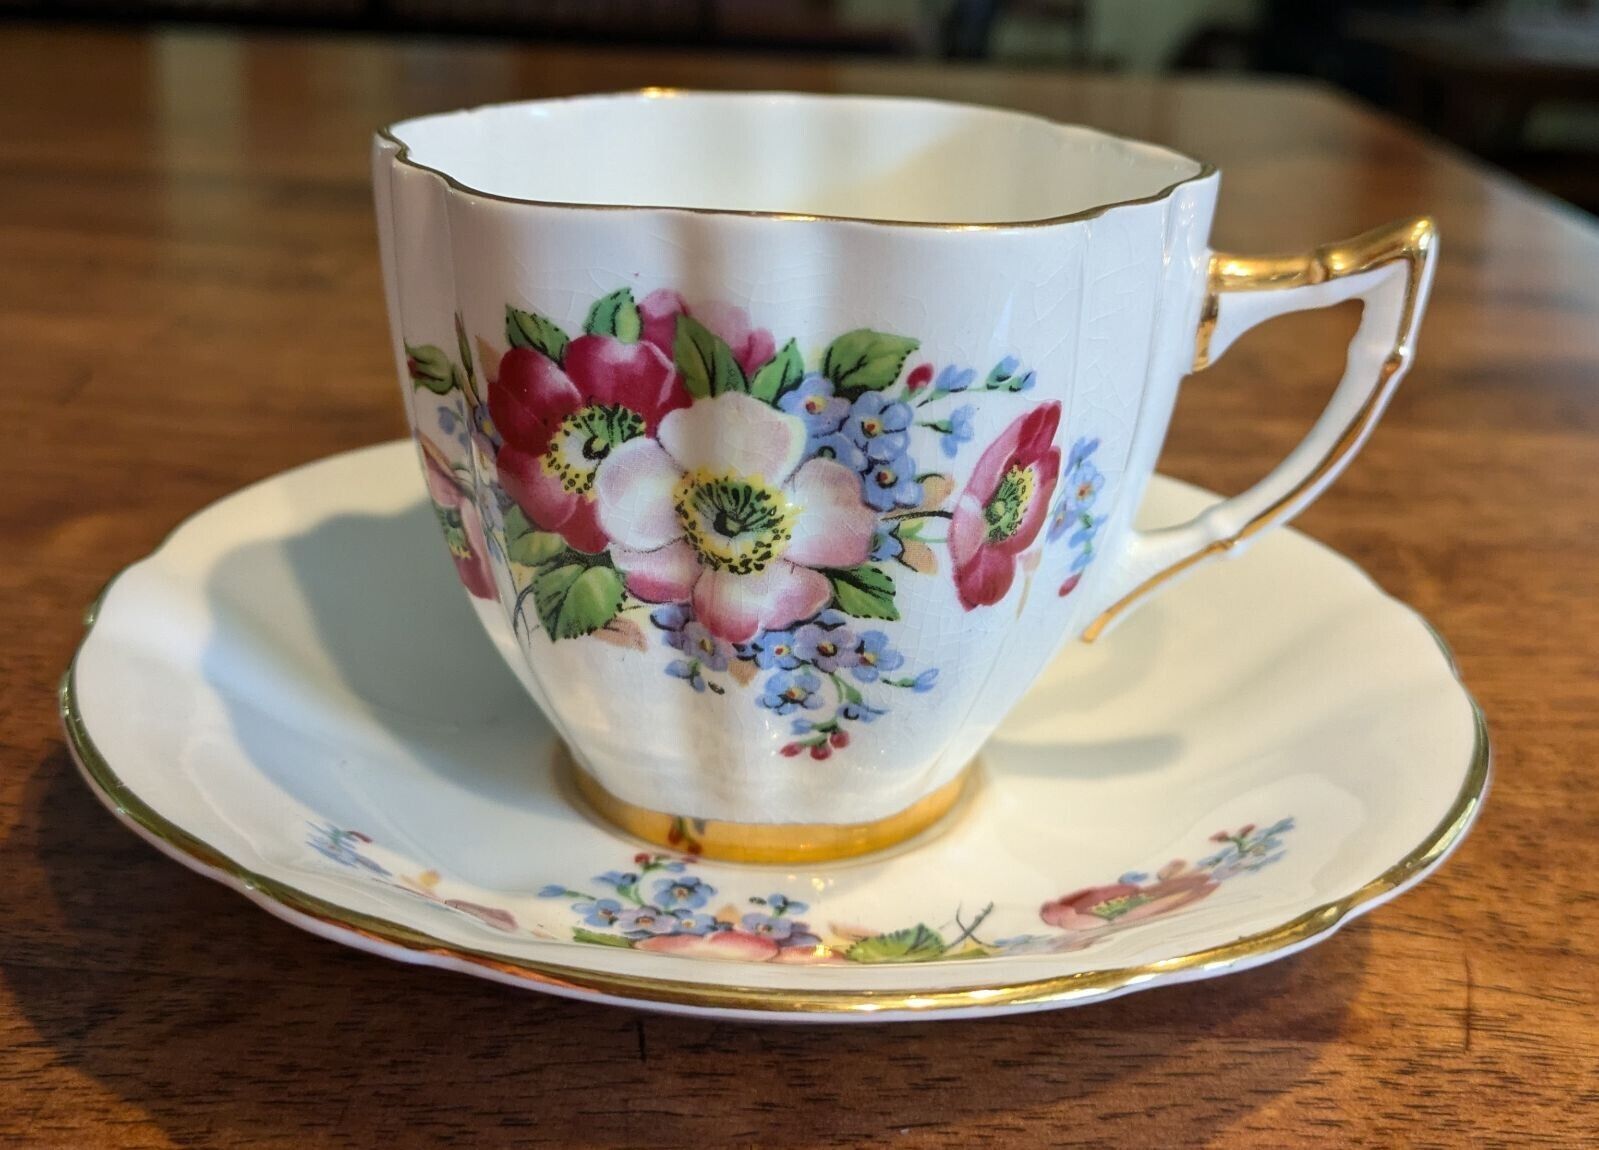 Royal Prince Bone China Cup And Saucer With Pink, Purple & Red Floral Design